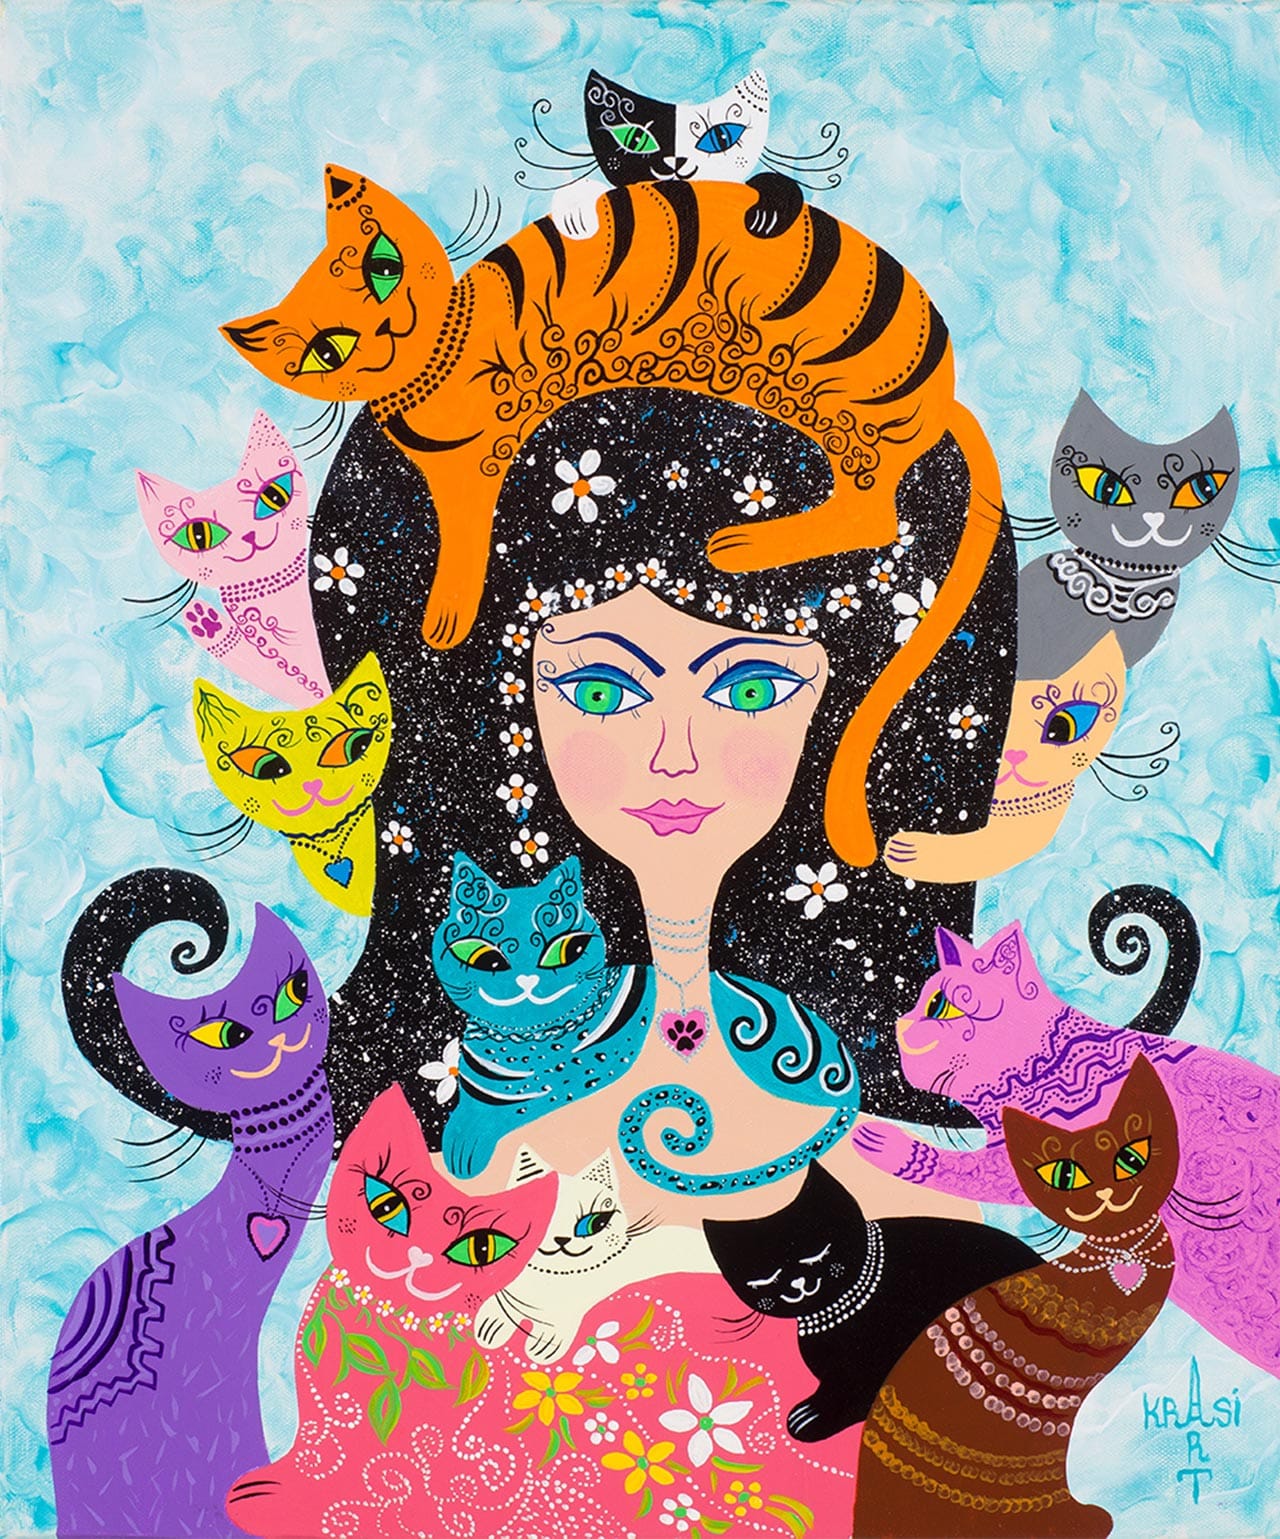 “A Crazy Cat Lady with her 13 Cats”